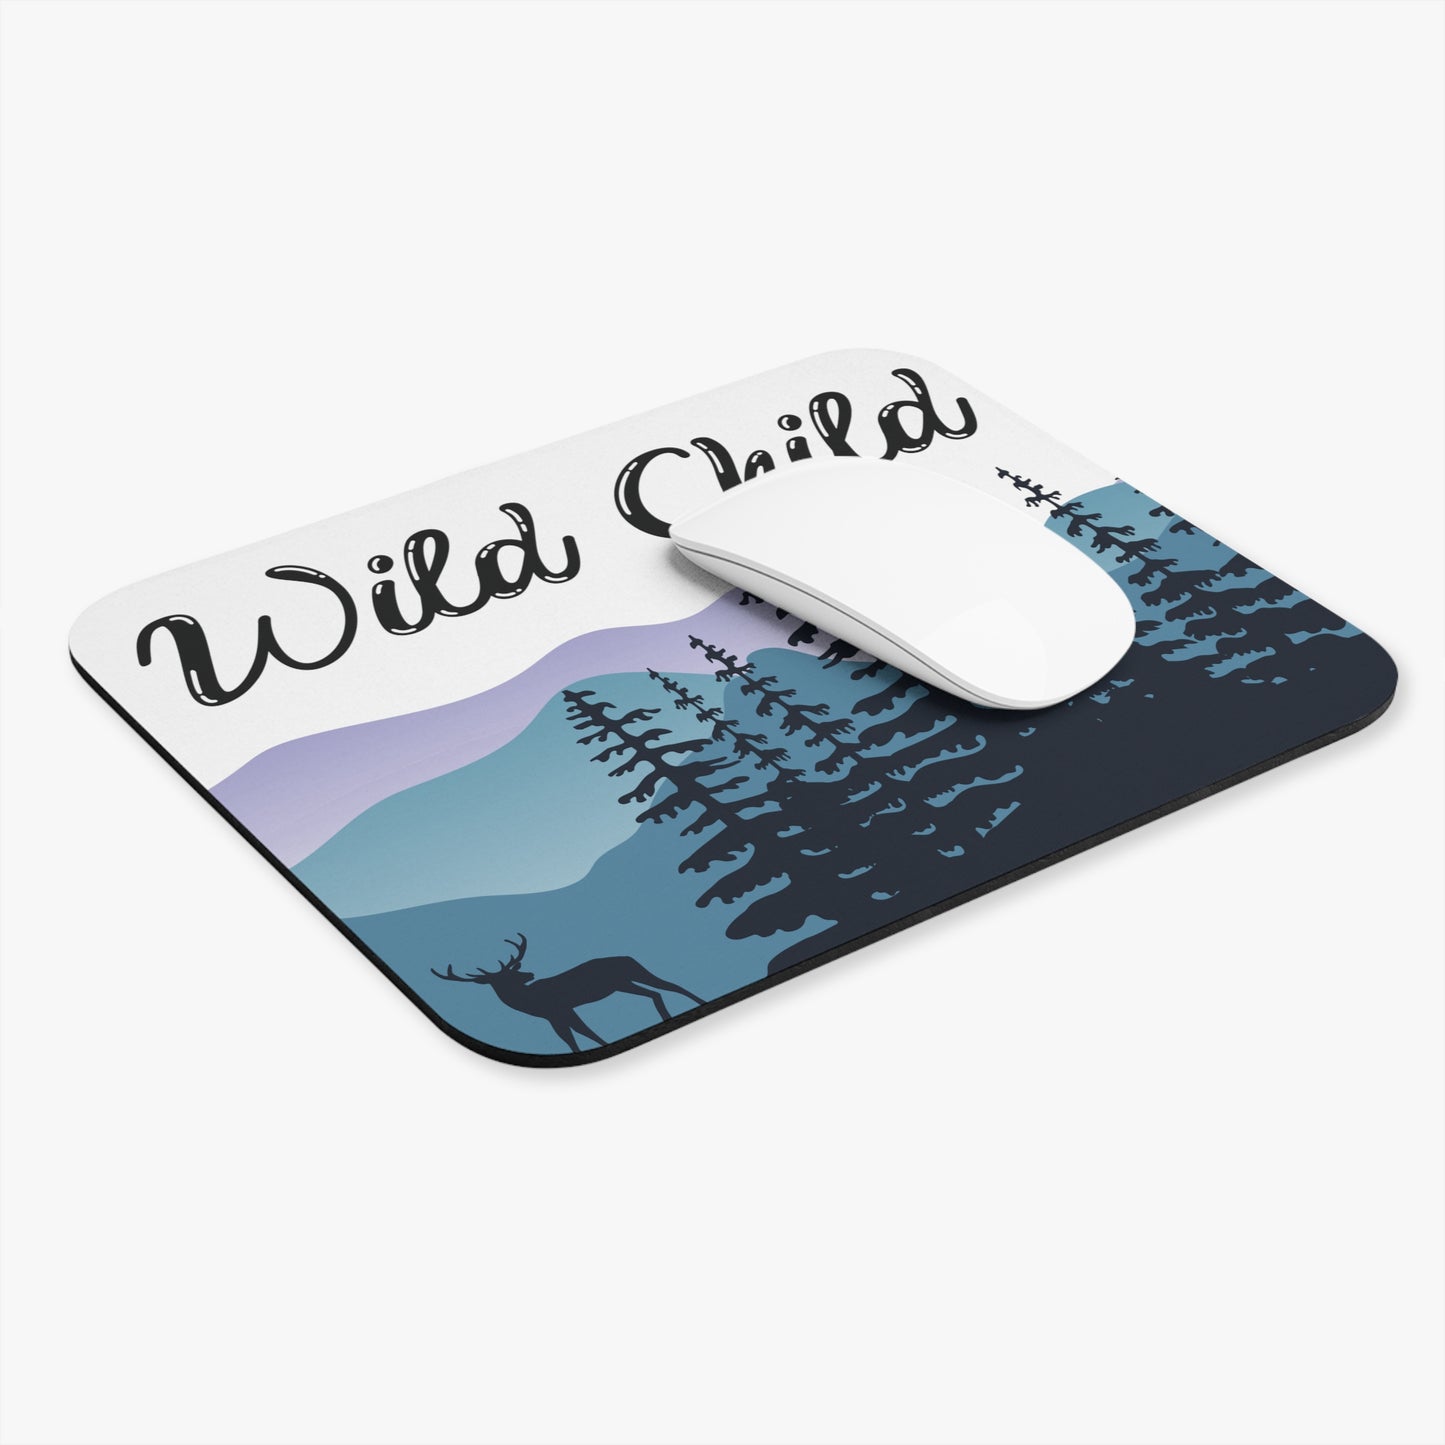 Wild Child Mouse Pad for Outdoor Lovers